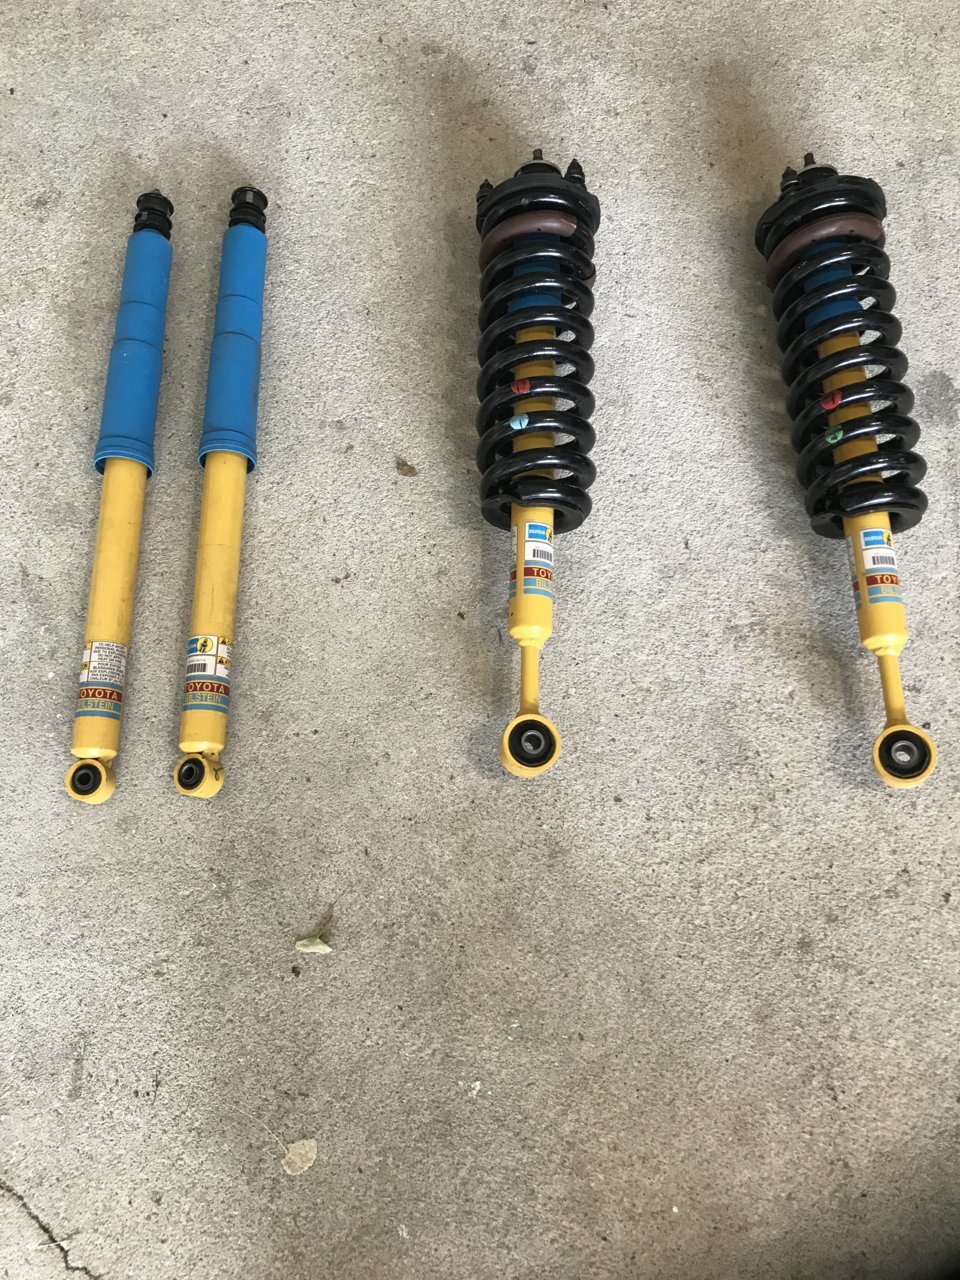 2020 TRD Off Road OEM Shocks and Coil Overs (IMG-2665.jpg) | Tacoma World